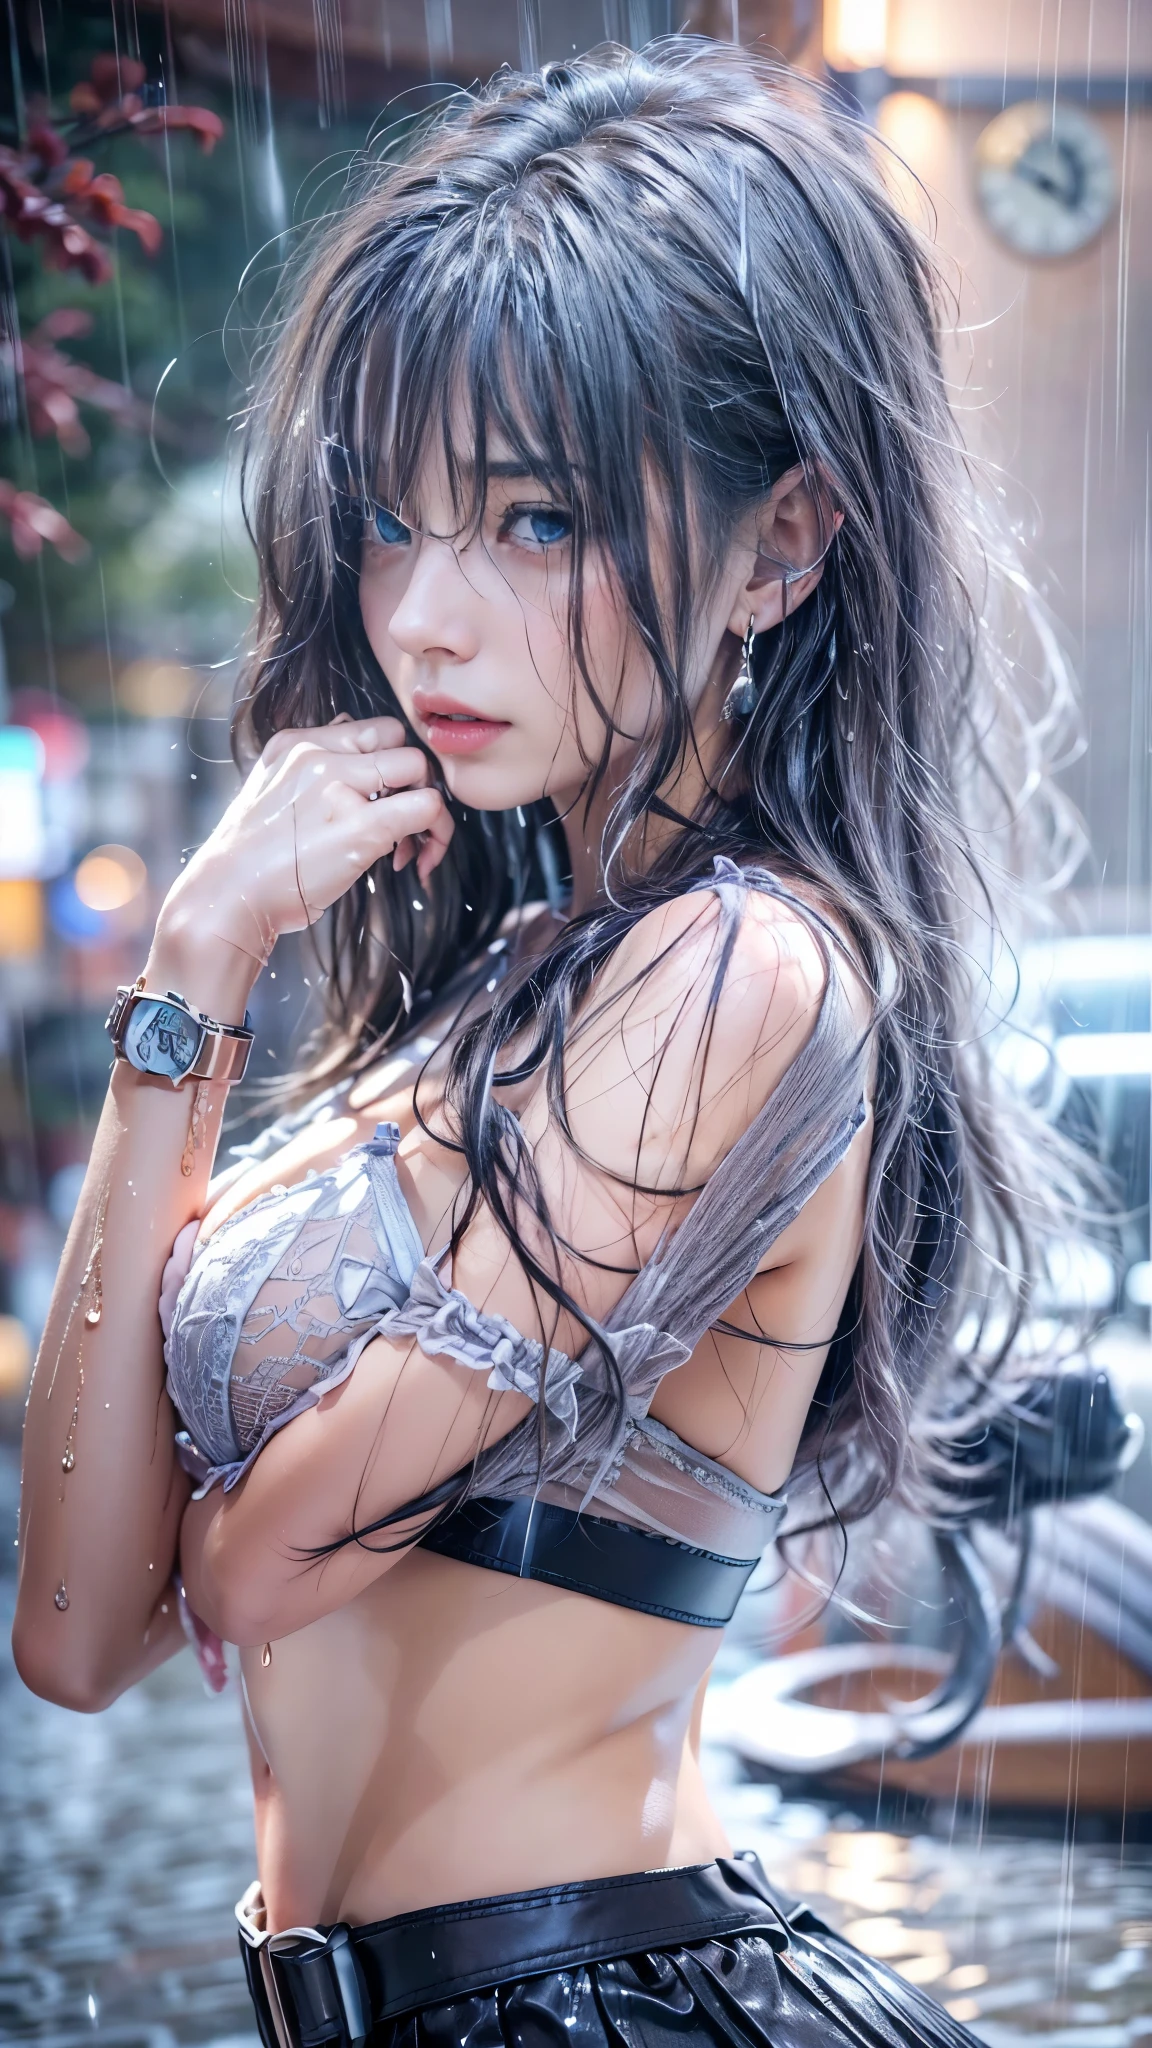 (RAW shooting, Photoreal:1.5, 8K, highest quality, masterpiece, ultra high resolution), perfect dynamic composition:1.2, Night street corner of a modern city, expression of sadness:0.3, (((Typhoon heavy rain))), Highly detailed skin and facial textures:1.2, Slim office lady wet in the rain:1.3, Fair skin, sexy beauty:1.1, perfect style:1.2, beautiful and aesthetic:1.1, very beautiful face, water droplets on the skin, (rain drips all over my body:1.2, wet body:1.2, wet hair:1.3), (wet office skirt:1.2, wet office lady uniform:1.3), belt, (Medium chest, Bra see-through, Chest gap), (cry, lovelorn, The expression on your face when you feel intense caress, Facial expression when feeling pleasure), (beautiful blue eyes, Eyes that feel beautiful eros:0.8), (Too erotic:0.9, Bewitching:0.9), cowboy shot, Shoulder bag, necklace, earrings, bracelet, clock